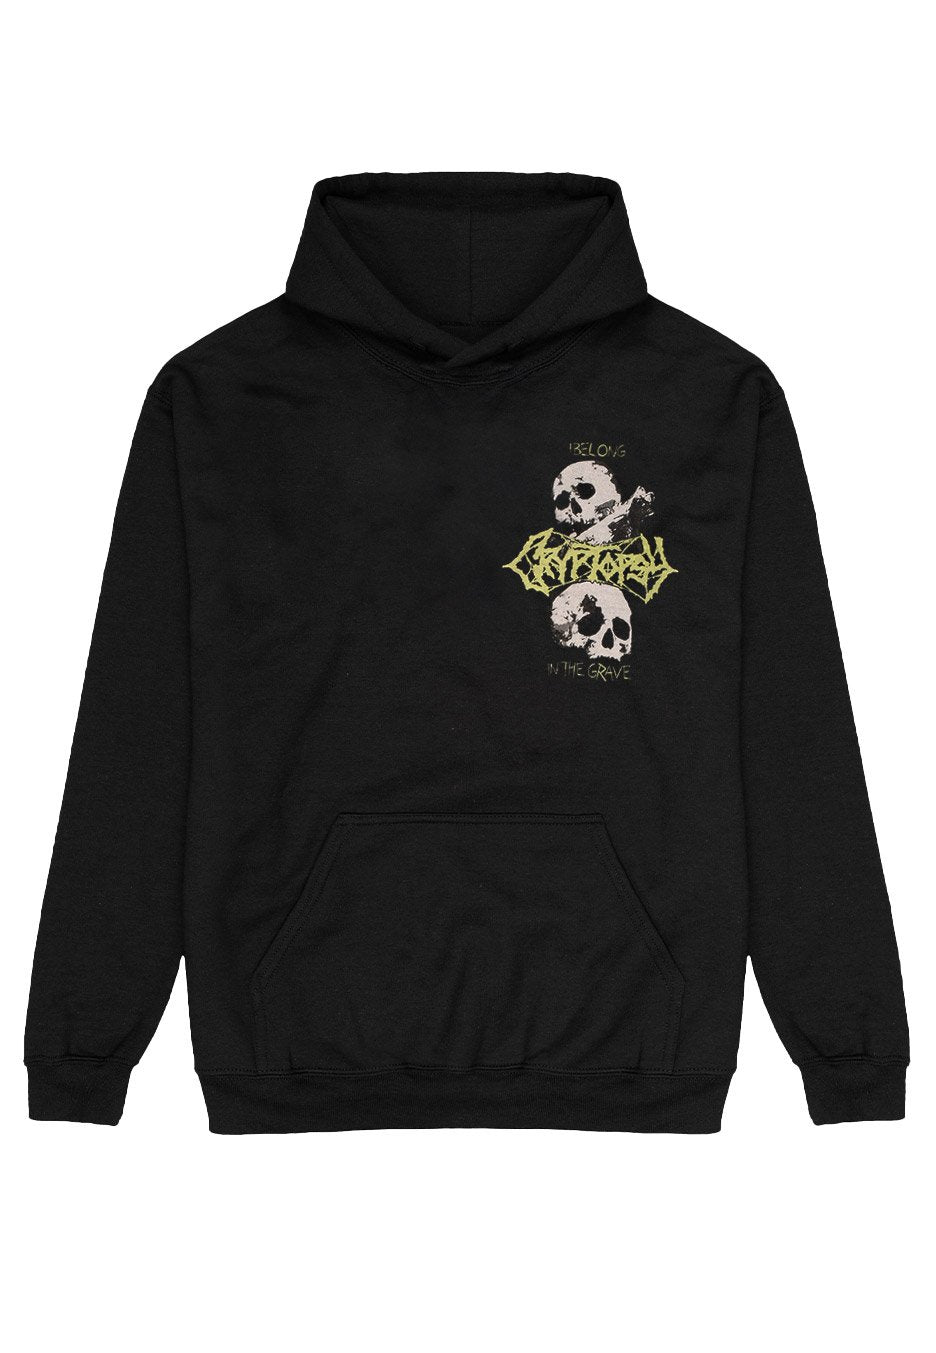 Cryptopsy - Ungentle Exhumation - Hoodie